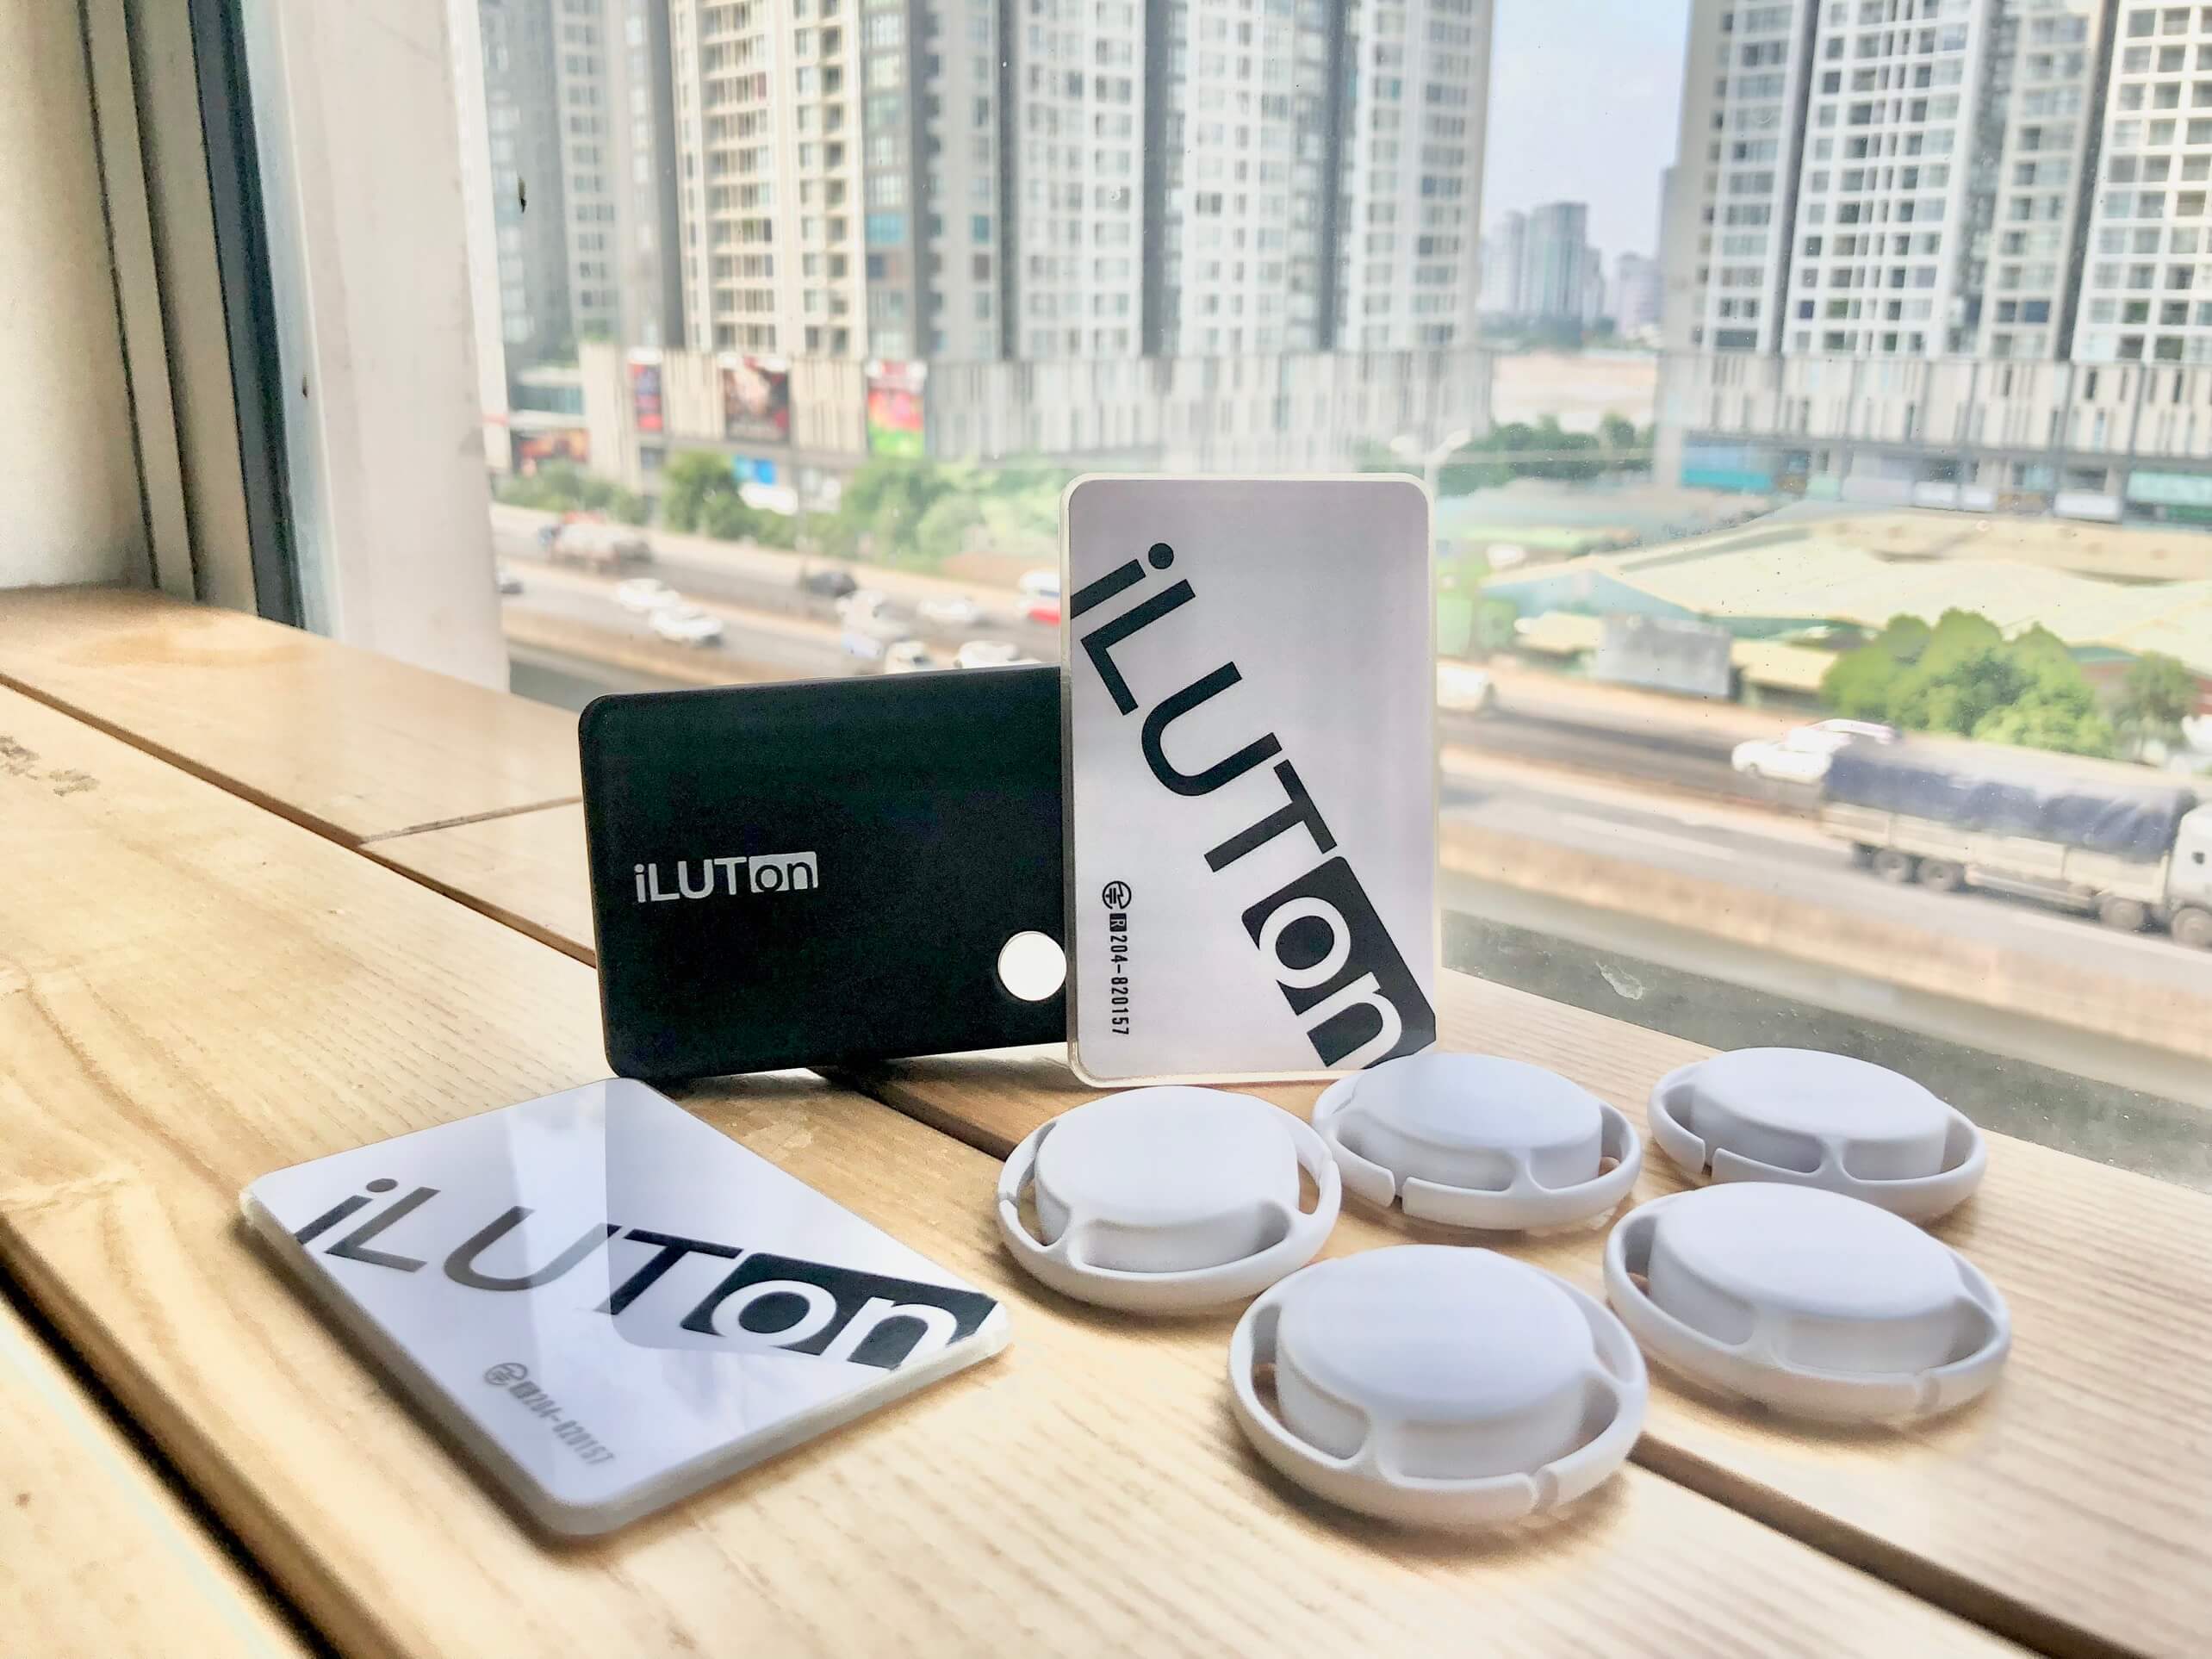 The Upgraded Version Of The Smart Security Card “iLUTon”, iLUTon-R, Is Going To Be Released